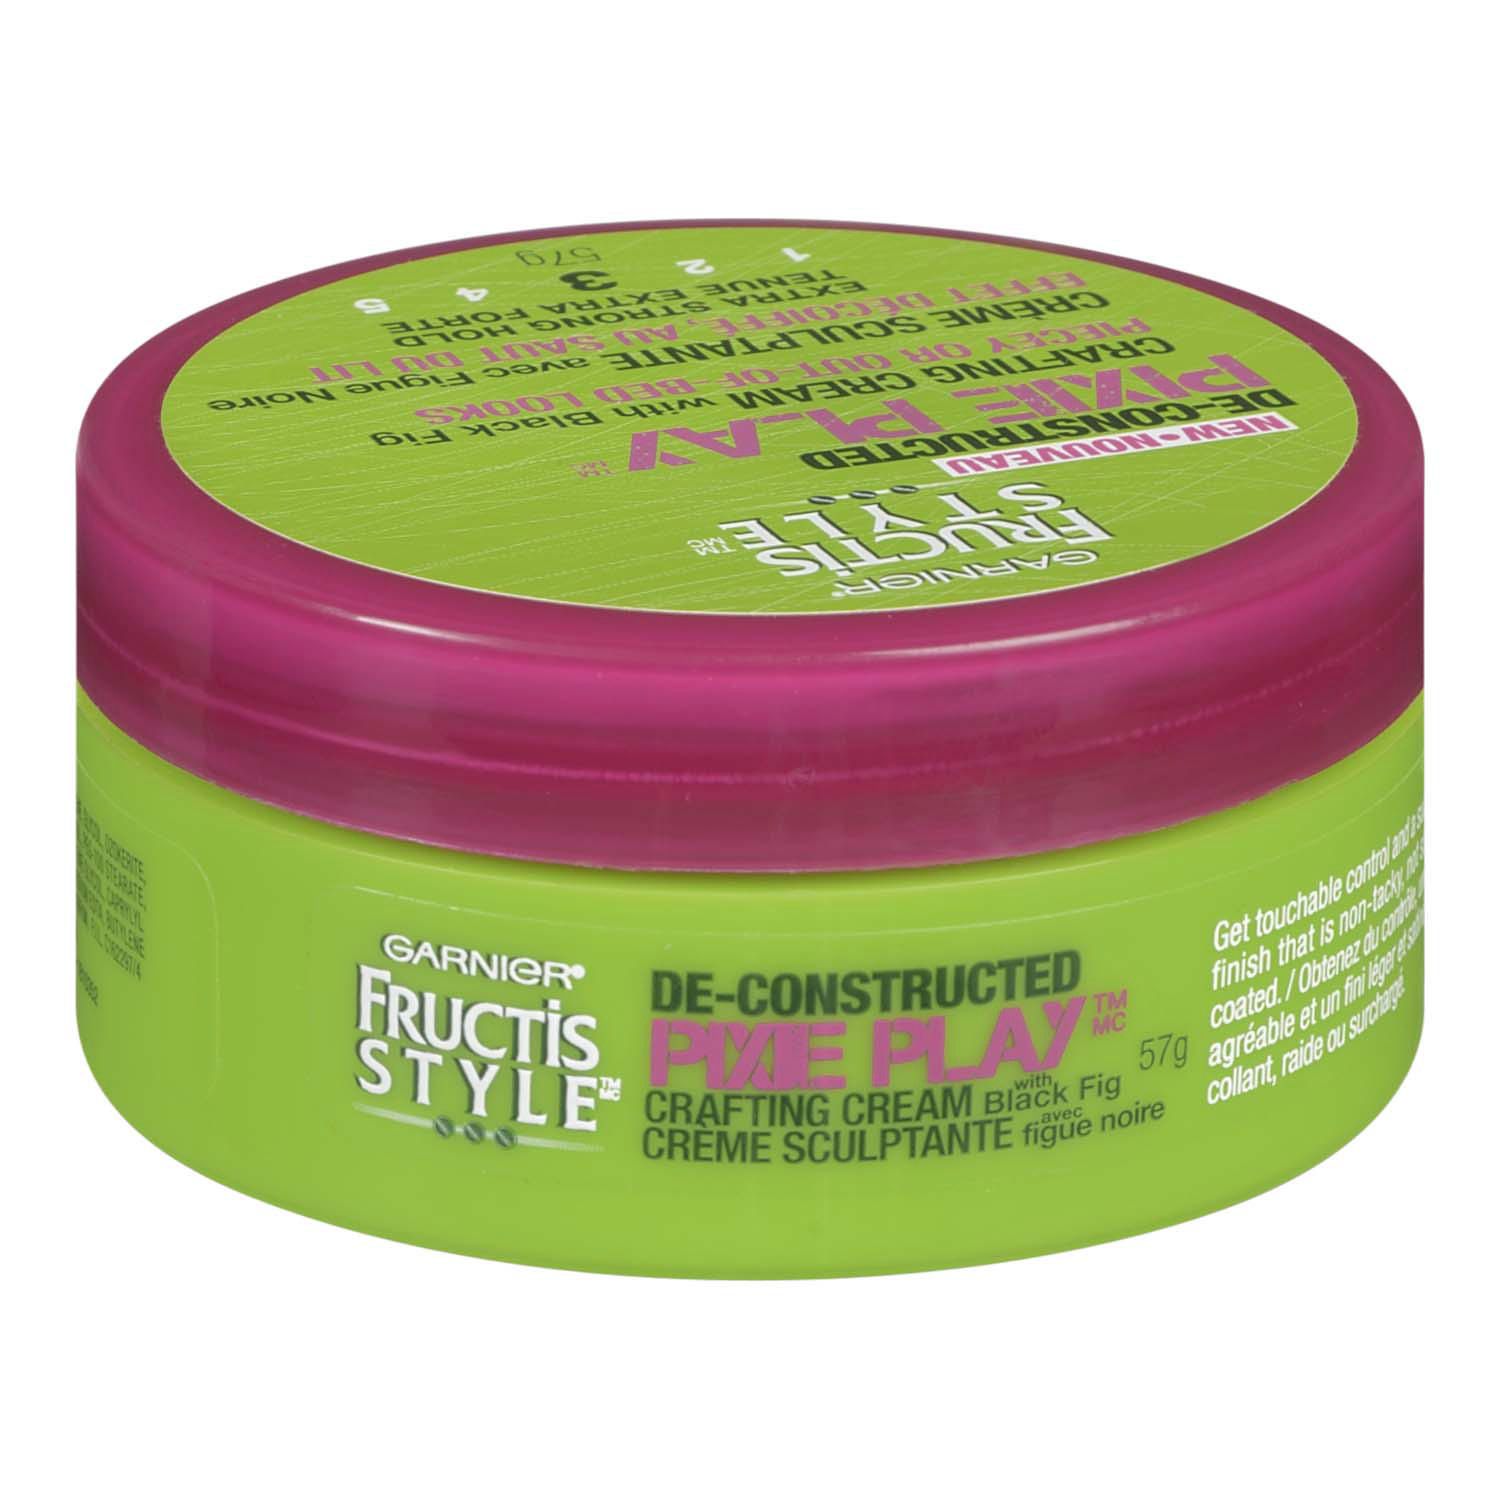 Garnier Fructis Style De-Constructed, Pixie Play Crafting Cream with Black  Fig, 57 g | Walmart Canada